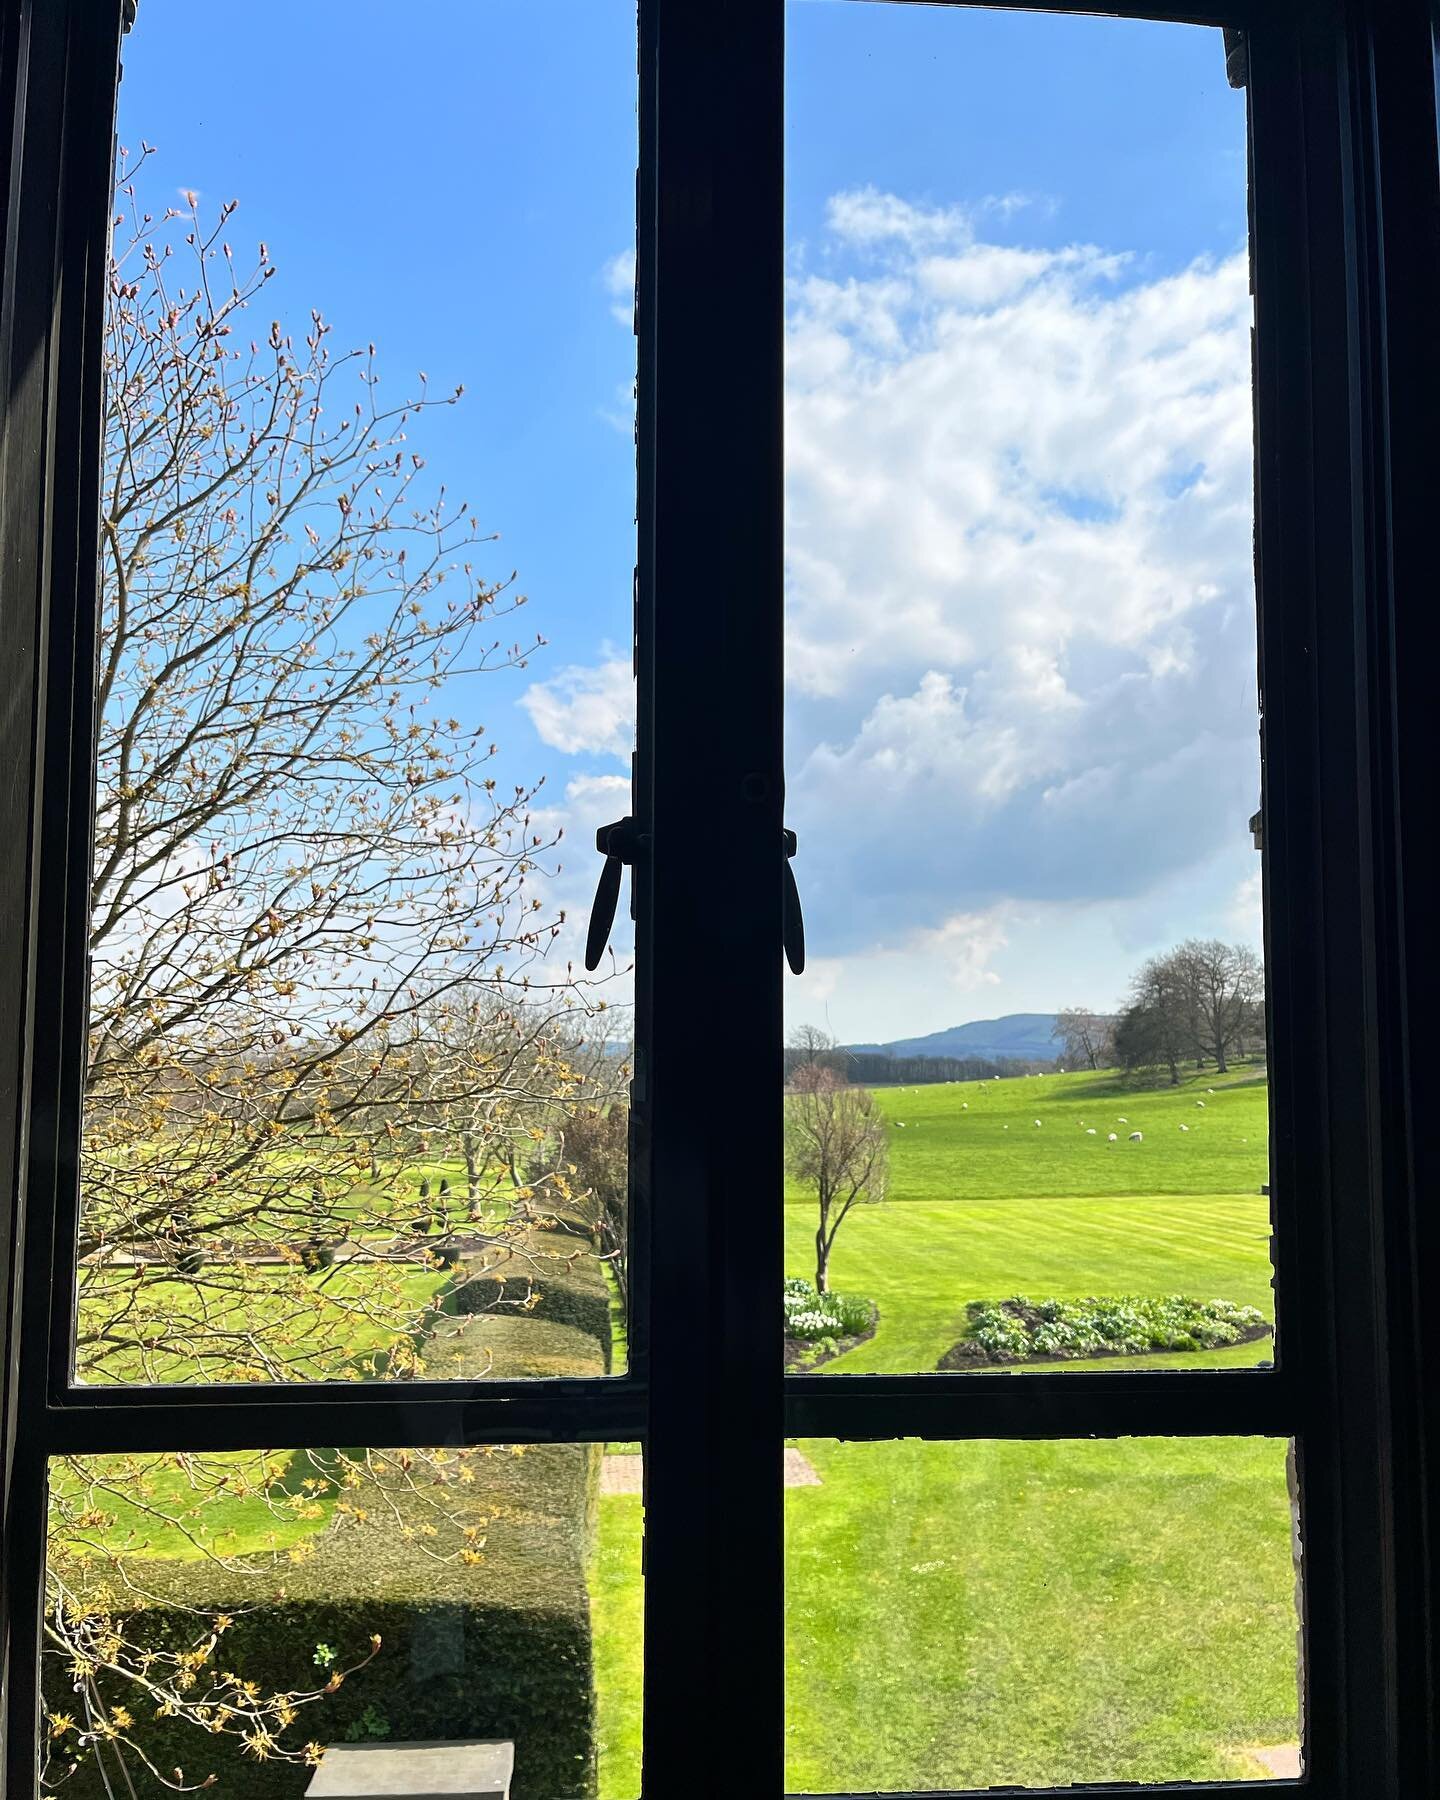 First week at Glyndebourne complete&hellip; ✨ 🎶 

&hellip;pretty special place.. ✨ 🐑 

Tickets on sale now&hellip;very excited to be a part of Donizetti&rsquo;s L&rsquo;elisir d&rsquo;amore &amp; Poulenc&rsquo;s Dialogues Des Carm&eacute;lites&hell